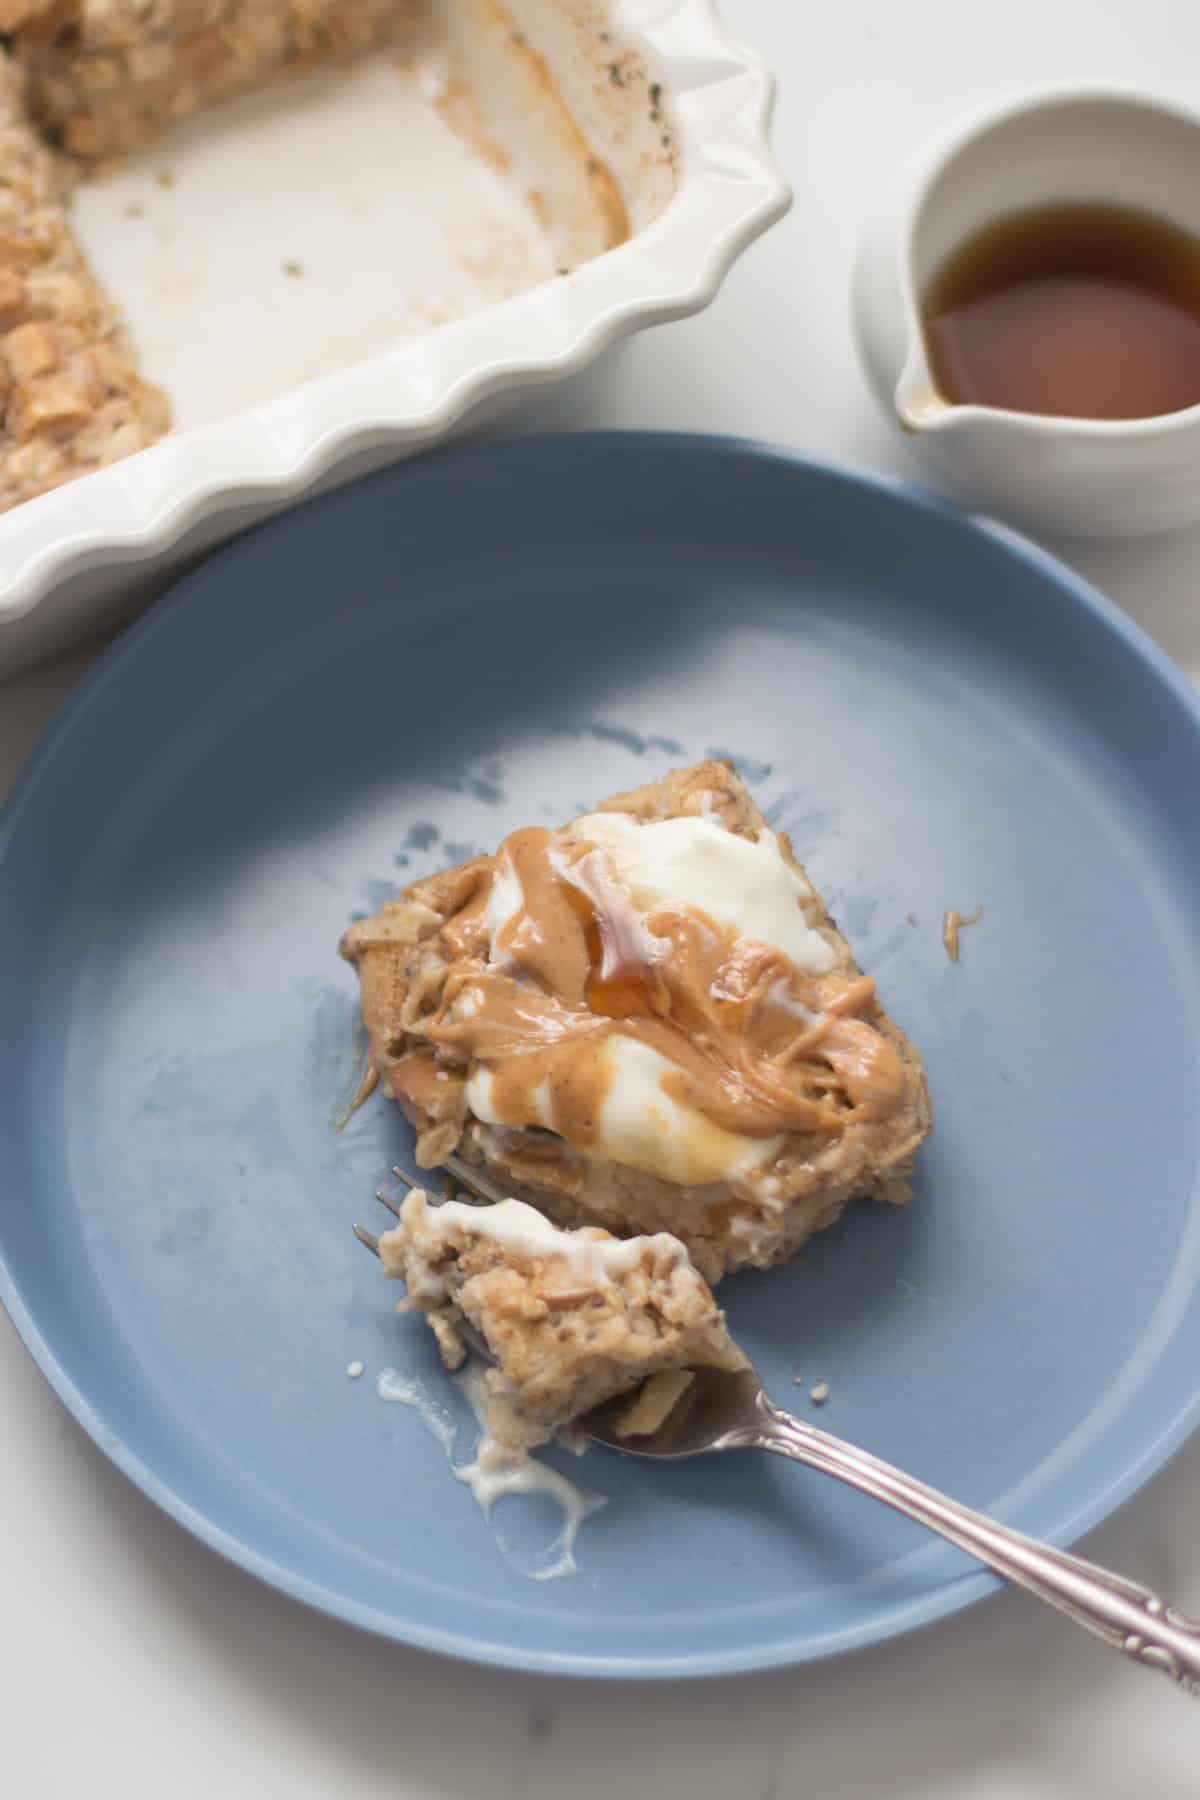 An oatmeal slice with yogurt, peanut butter, and maple syrup on top.